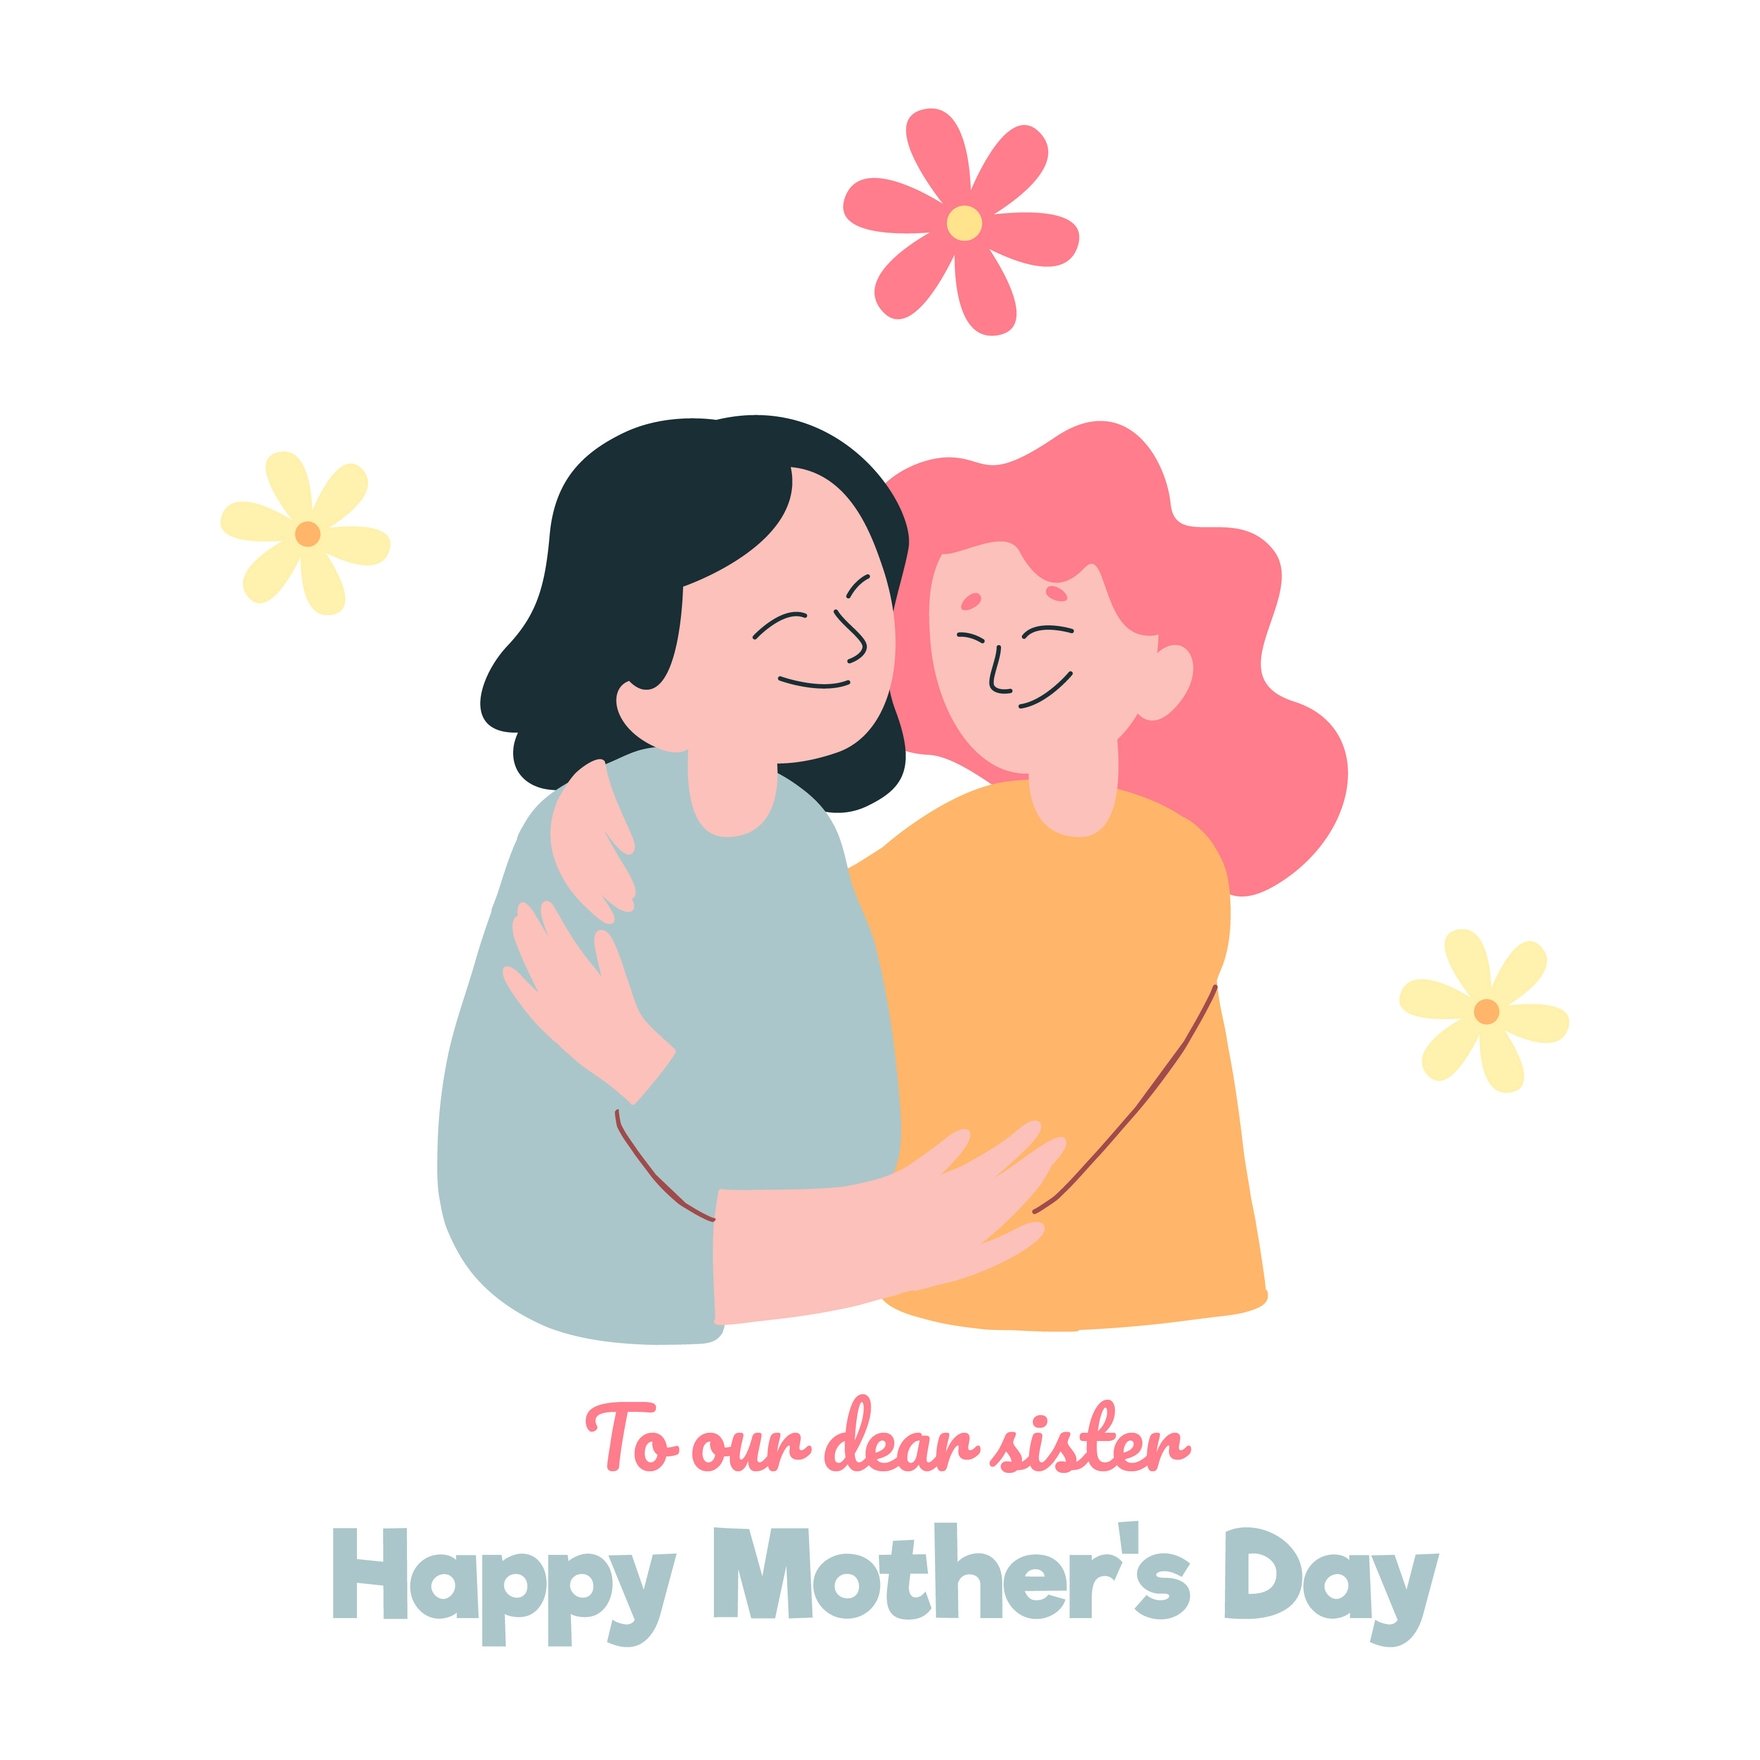 Happy Mother's Day Sister GIF in Illustrator, EPS, SVG, JPG, GIF, PNG, After Effects